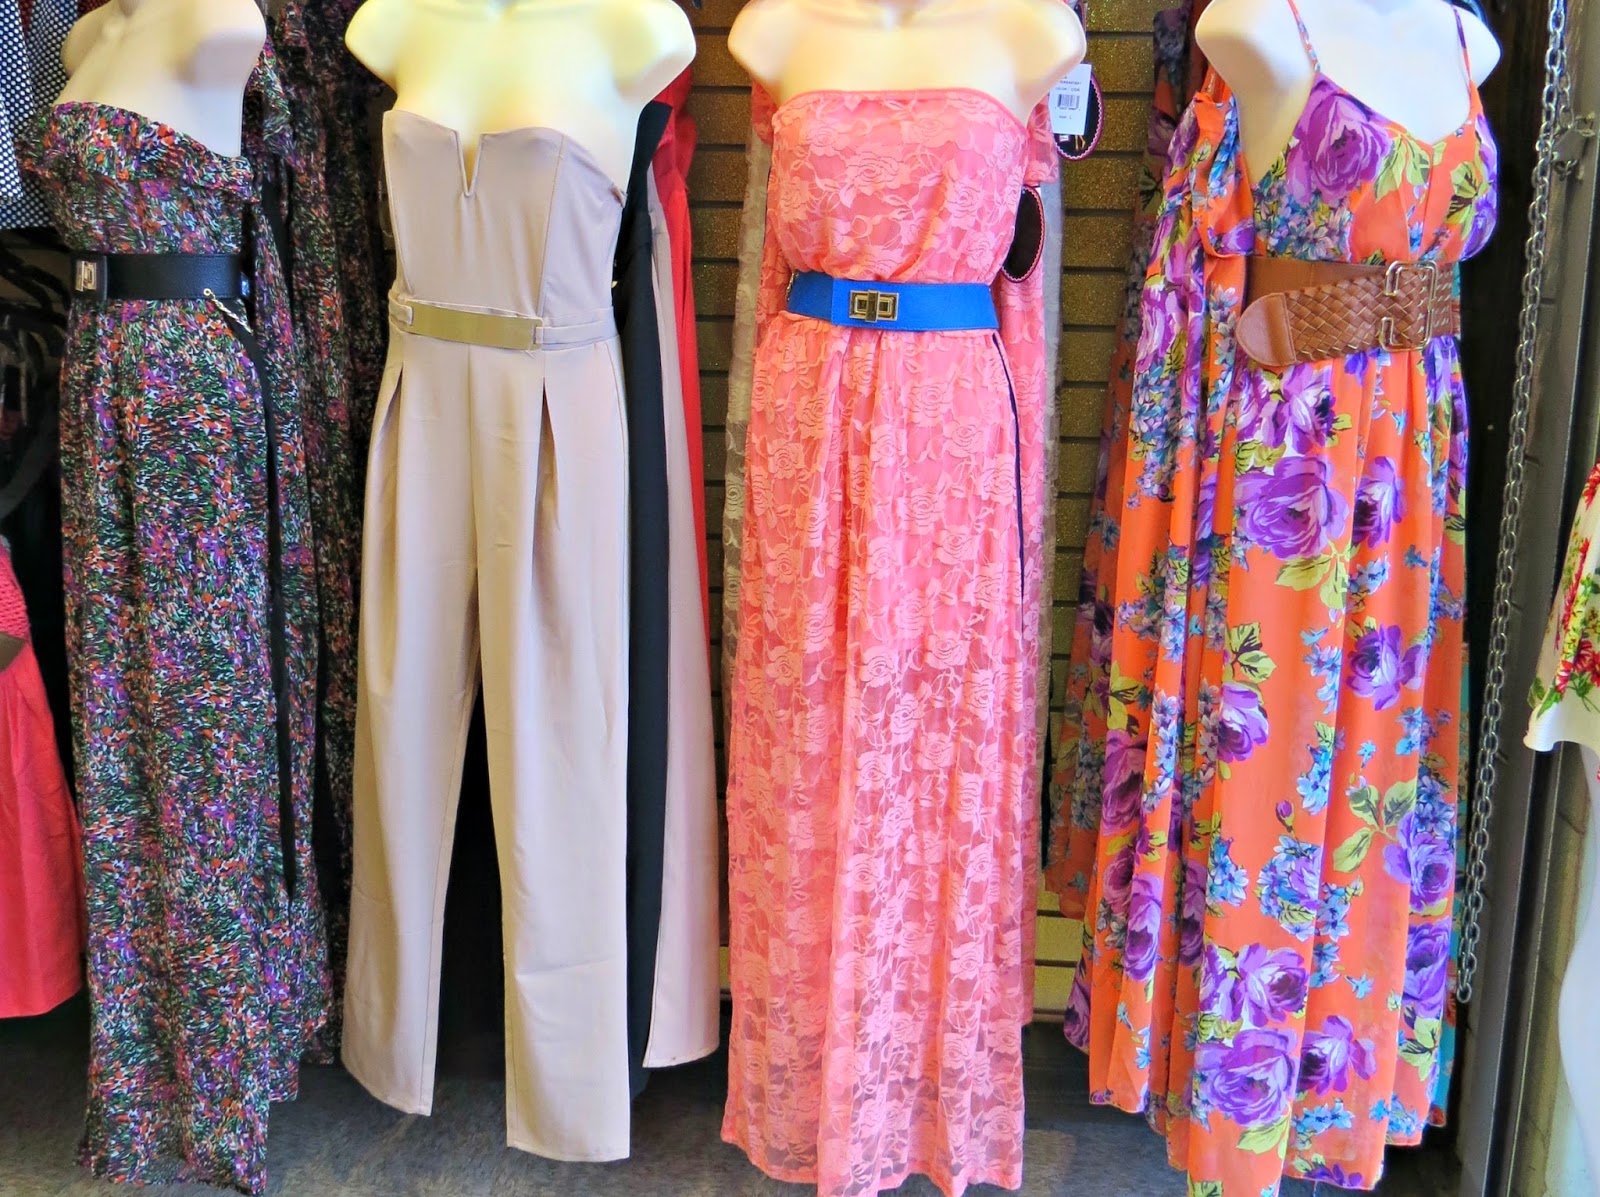 The Santee Alley: Weekly Fashion Finds: High-Waisted Denim & Summer Dresses